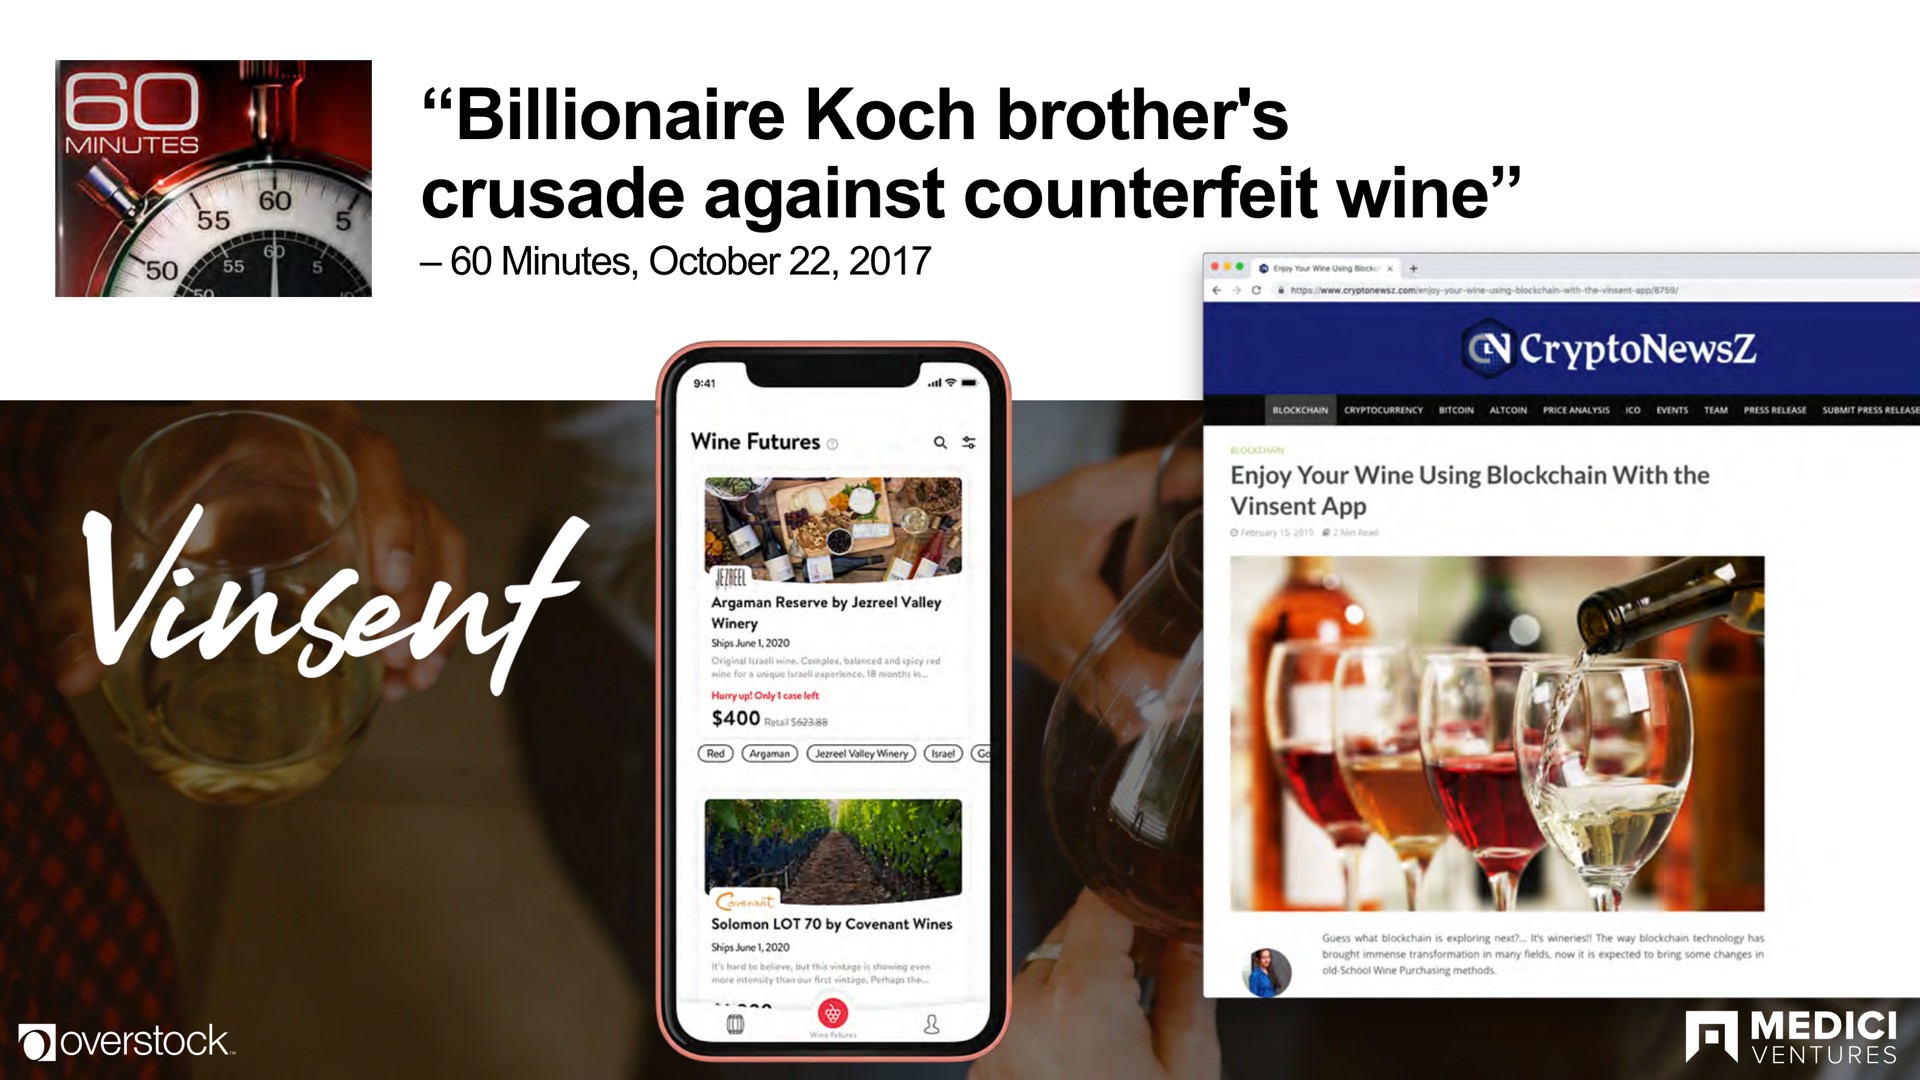 billionaire brother crusade against counterfeit wine i | Overstock